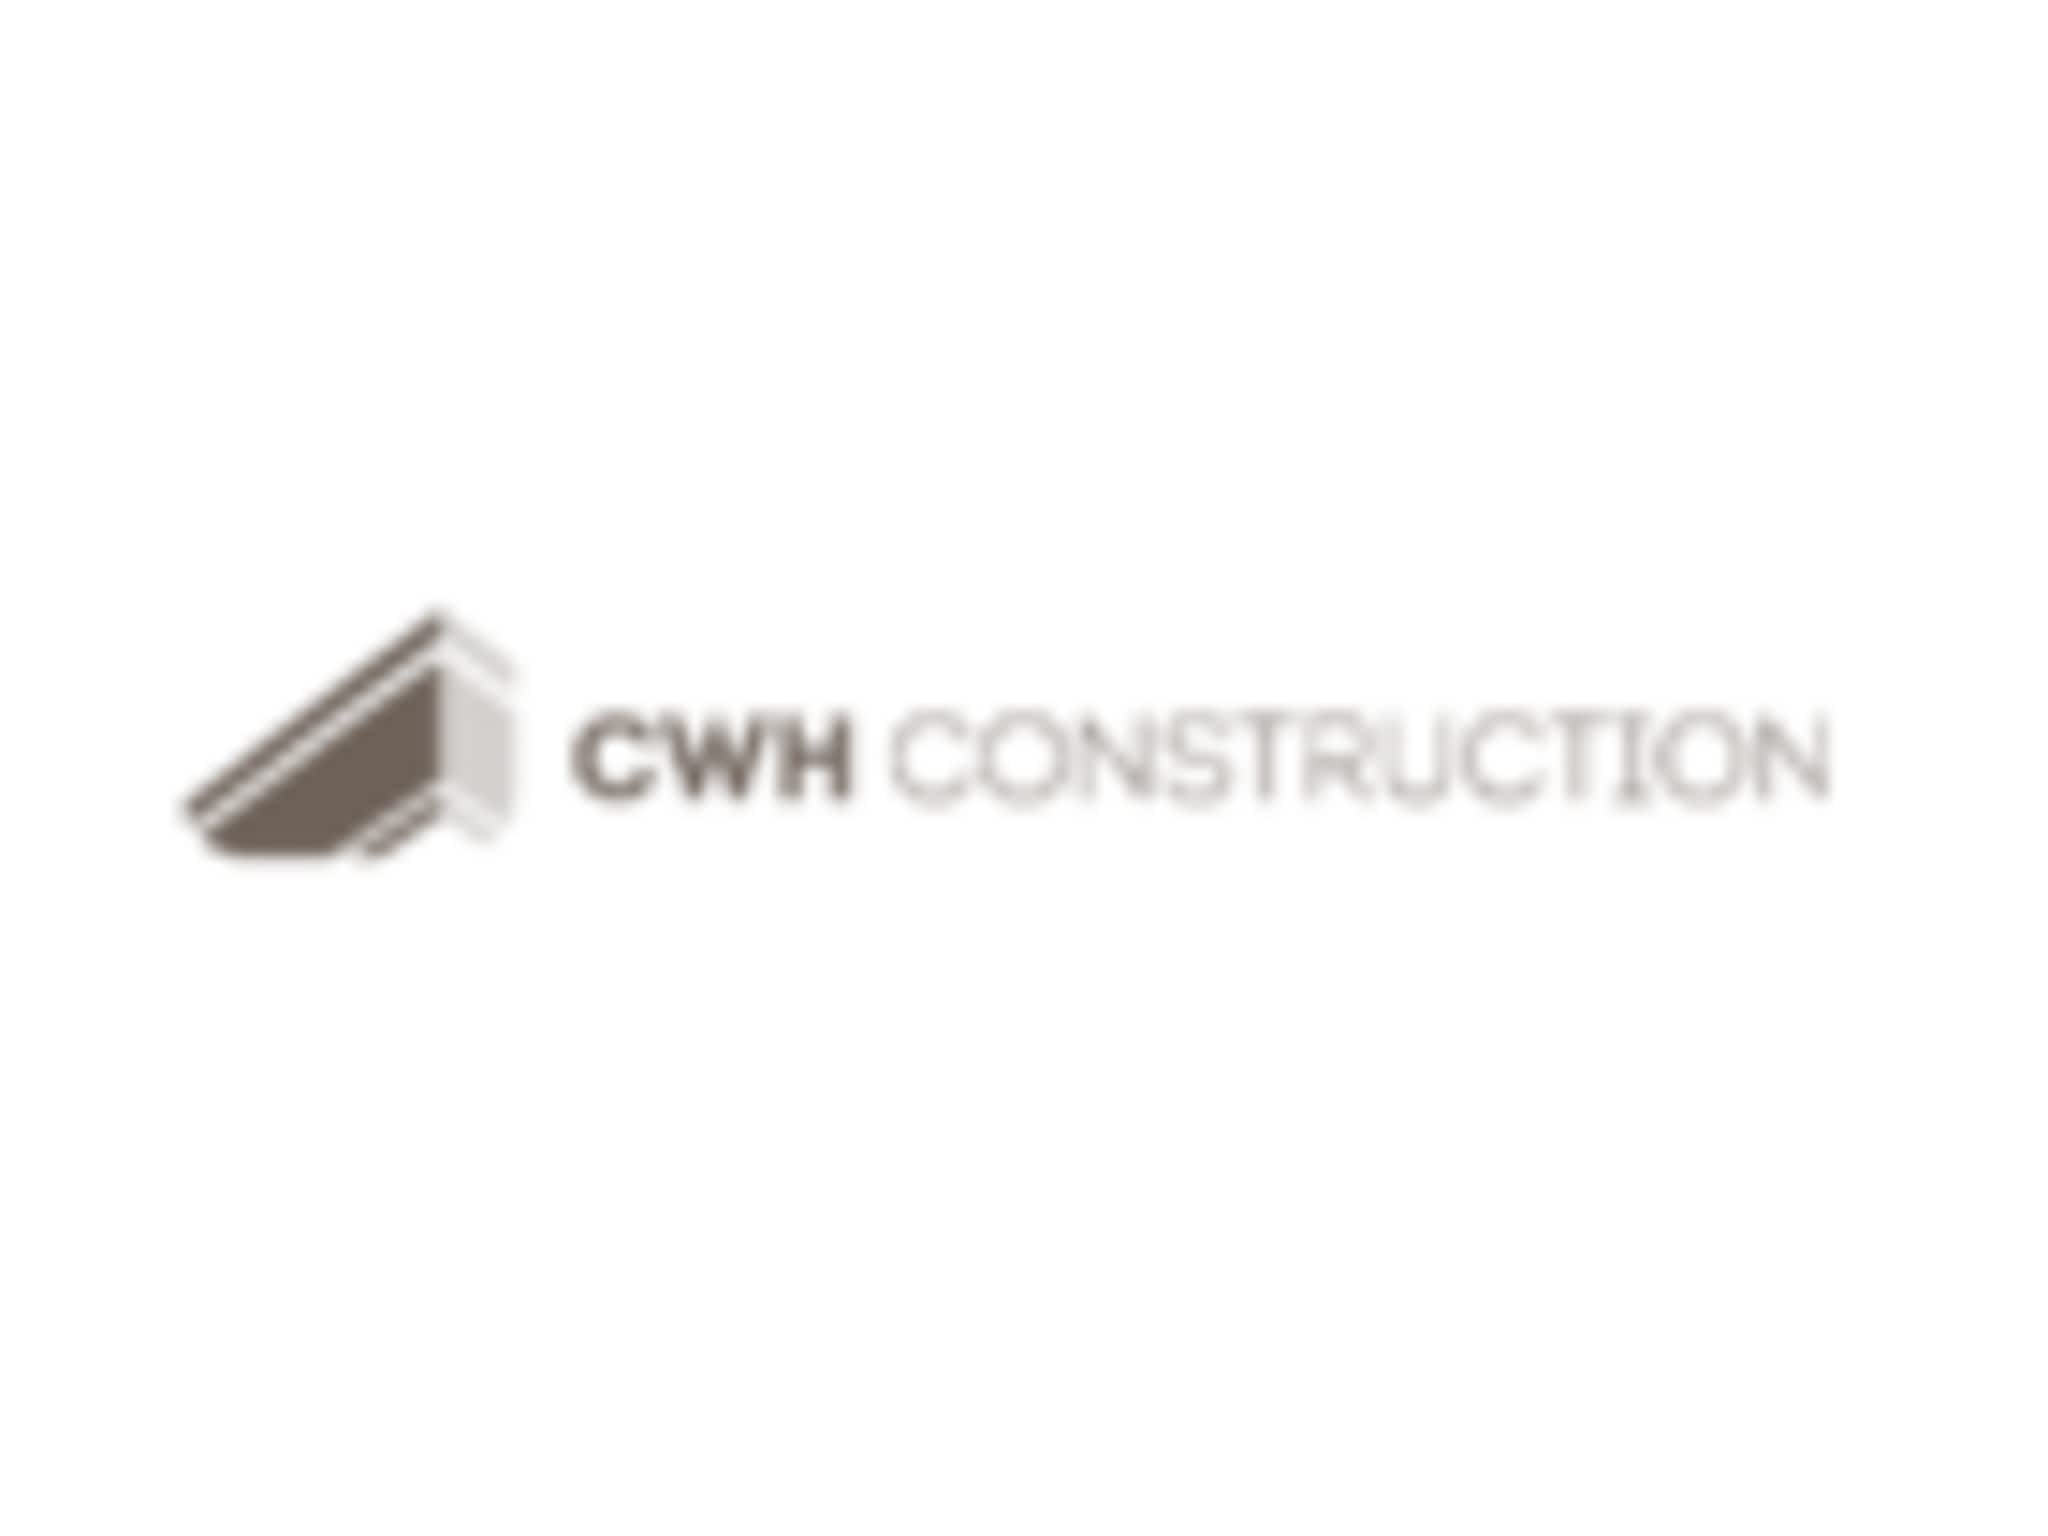 photo CWH Construction